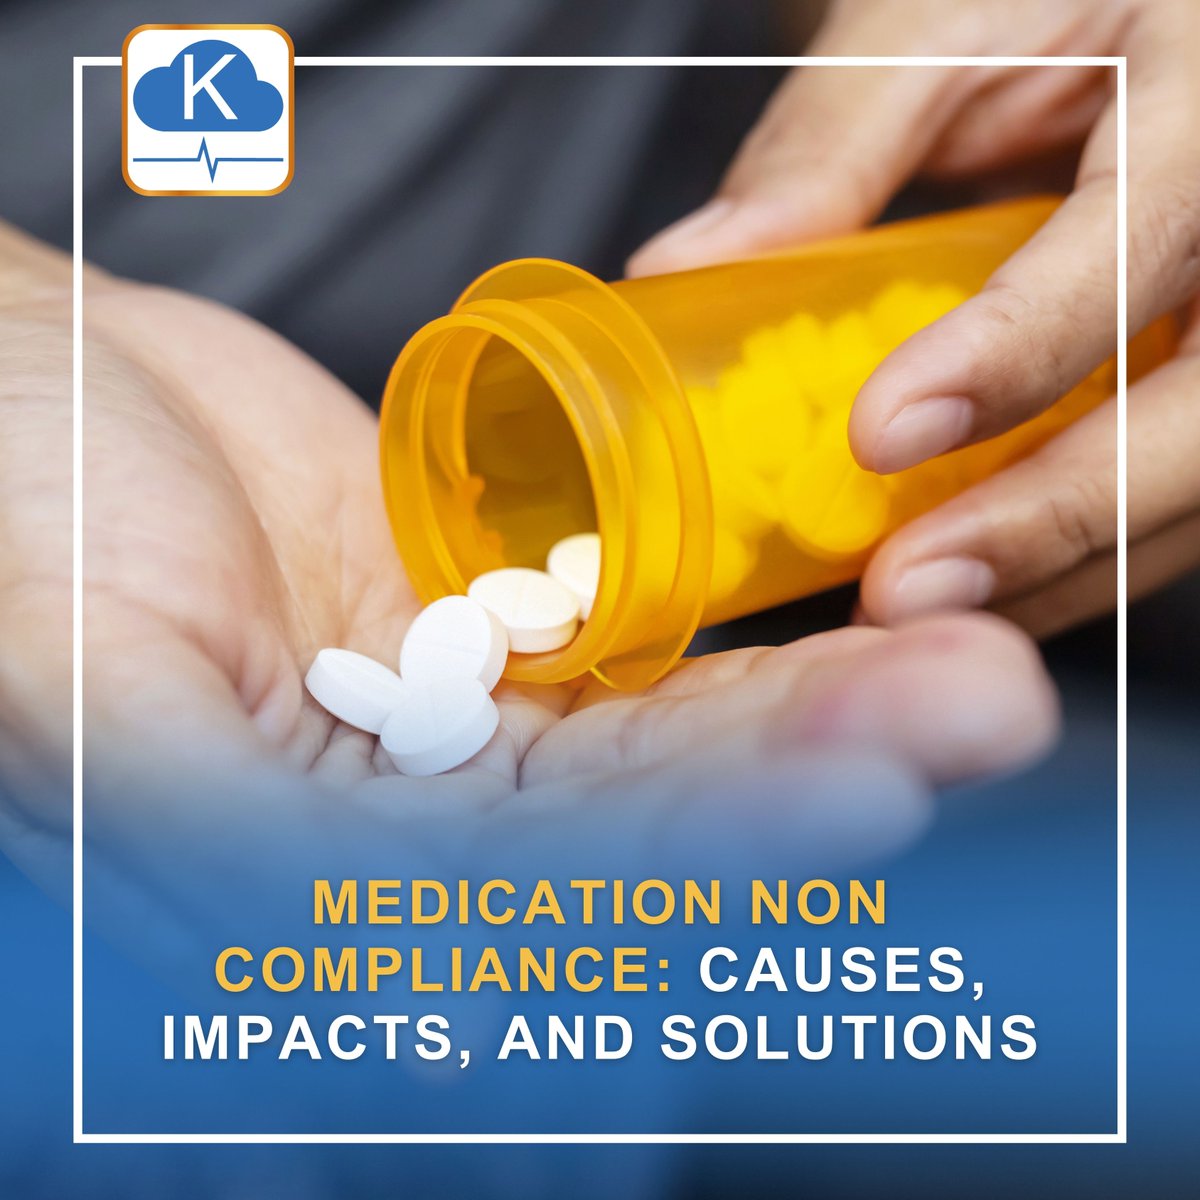 Medication non-compliance can have a ripple effect on your health and well-being. Learn about the root causes and innovative solutions in our latest post. 

Read here:
drkumo.com/causes-impacts…

#healthblog #healthandwellness #DrKumo #remotepatientmonitoring #rpm #health